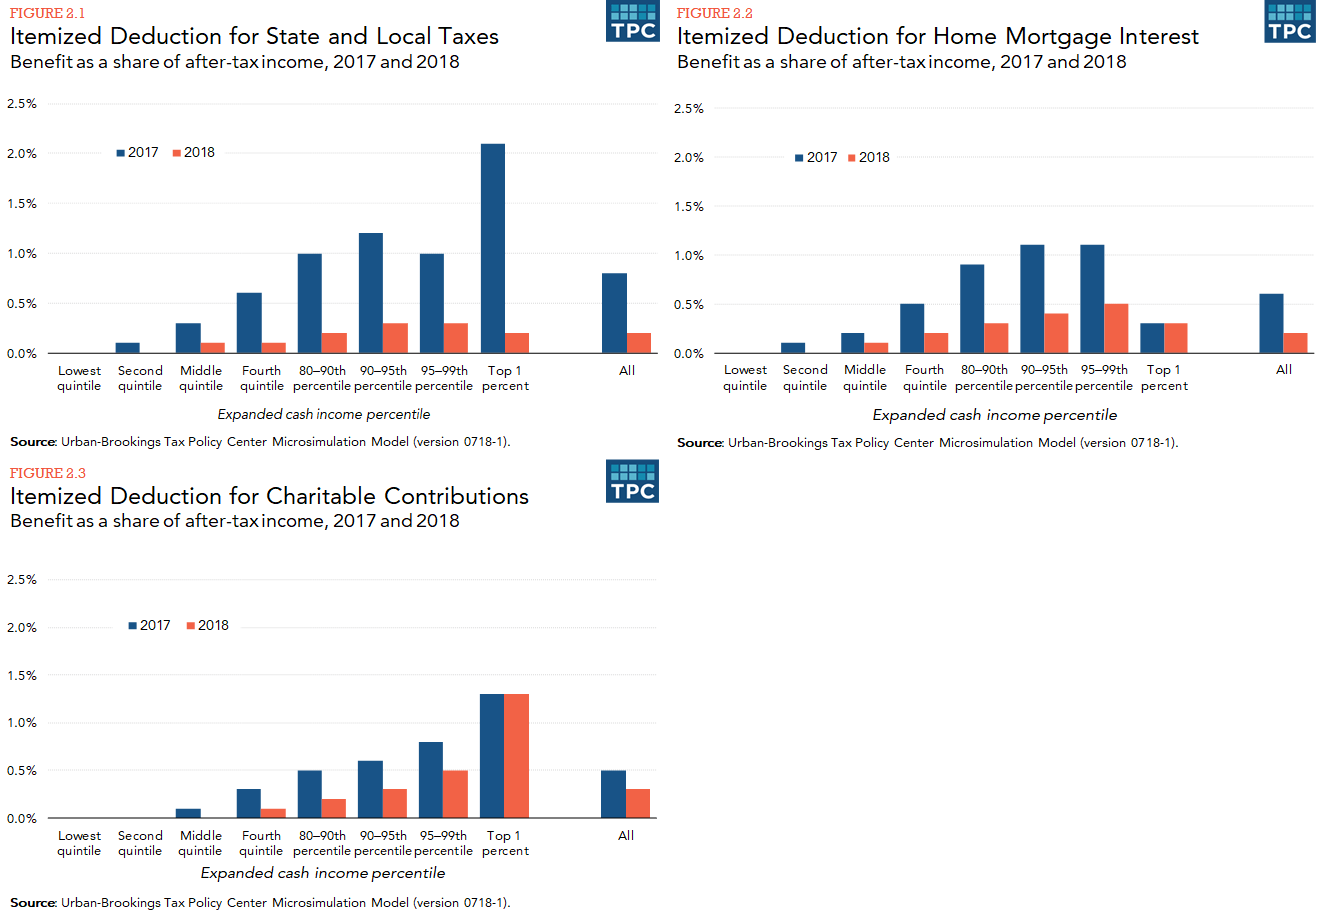 Three panel bar chart showing average benefit as share of after-tax income by income quintile for state and local tax, home mortgage interest, and charitable contributions deductions, in 2017 and 2018.